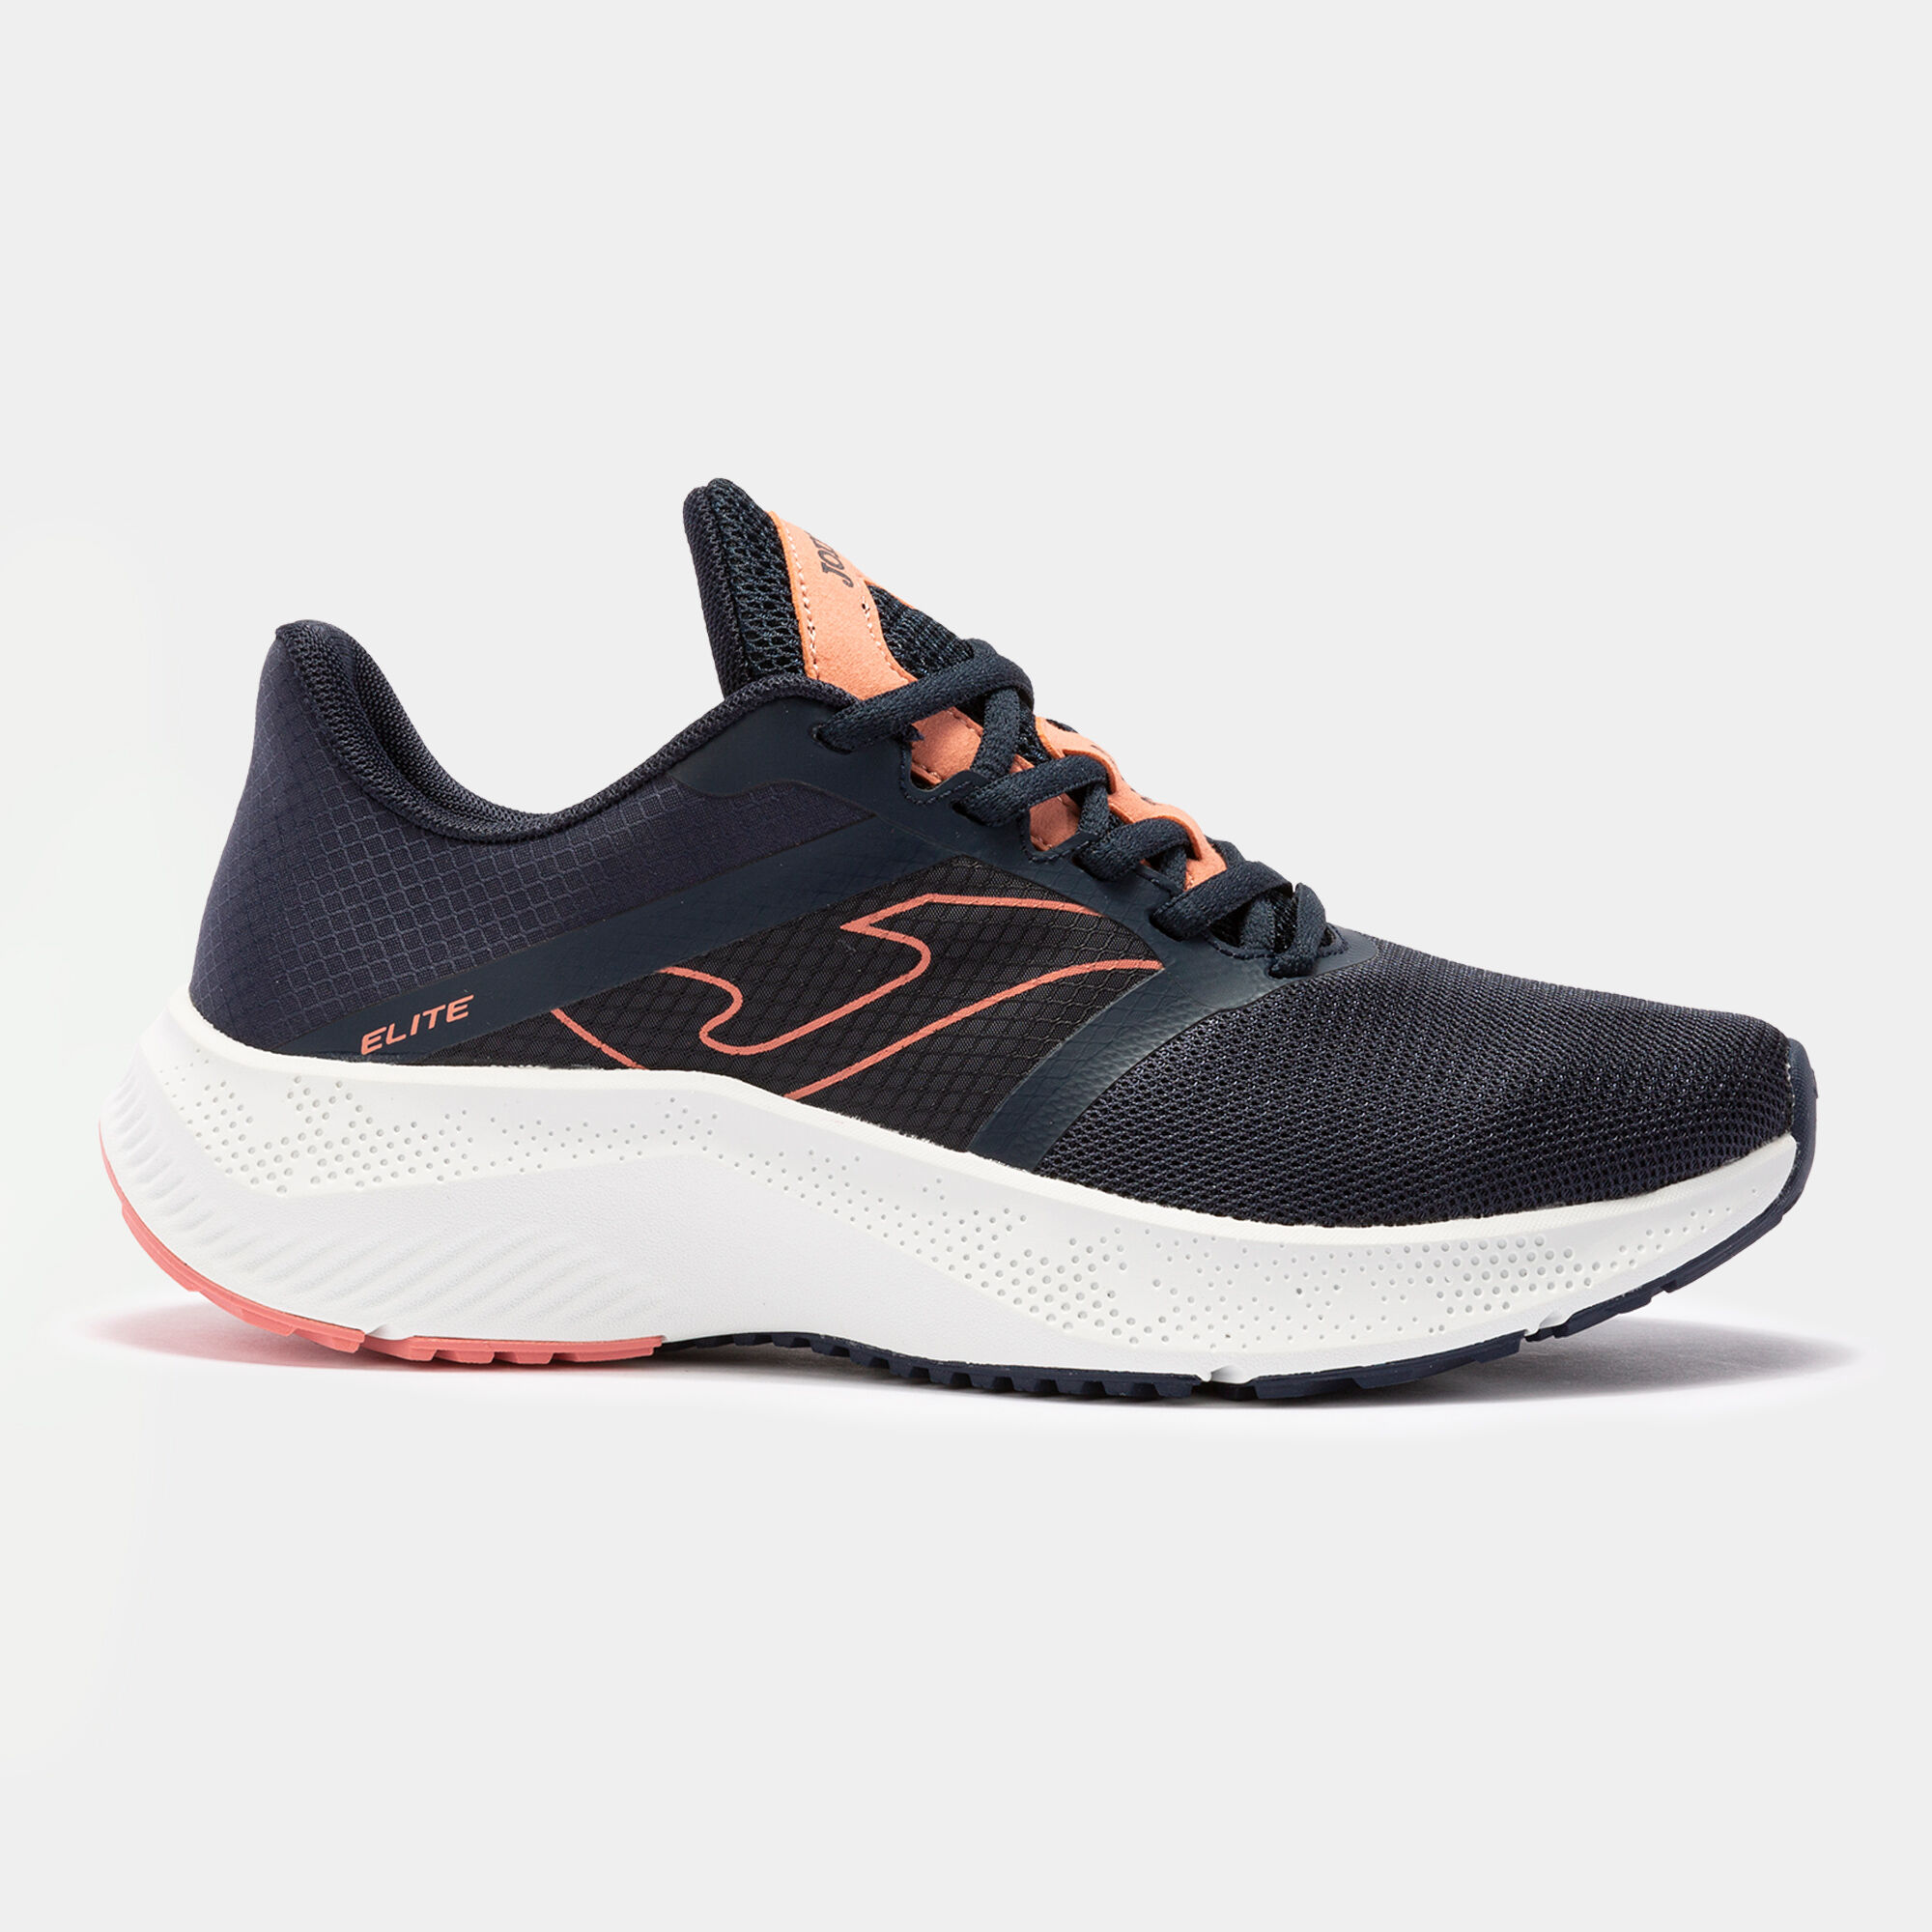 RUNNING SHOES ELITE 22 WOMAN NAVY BLUE PINK